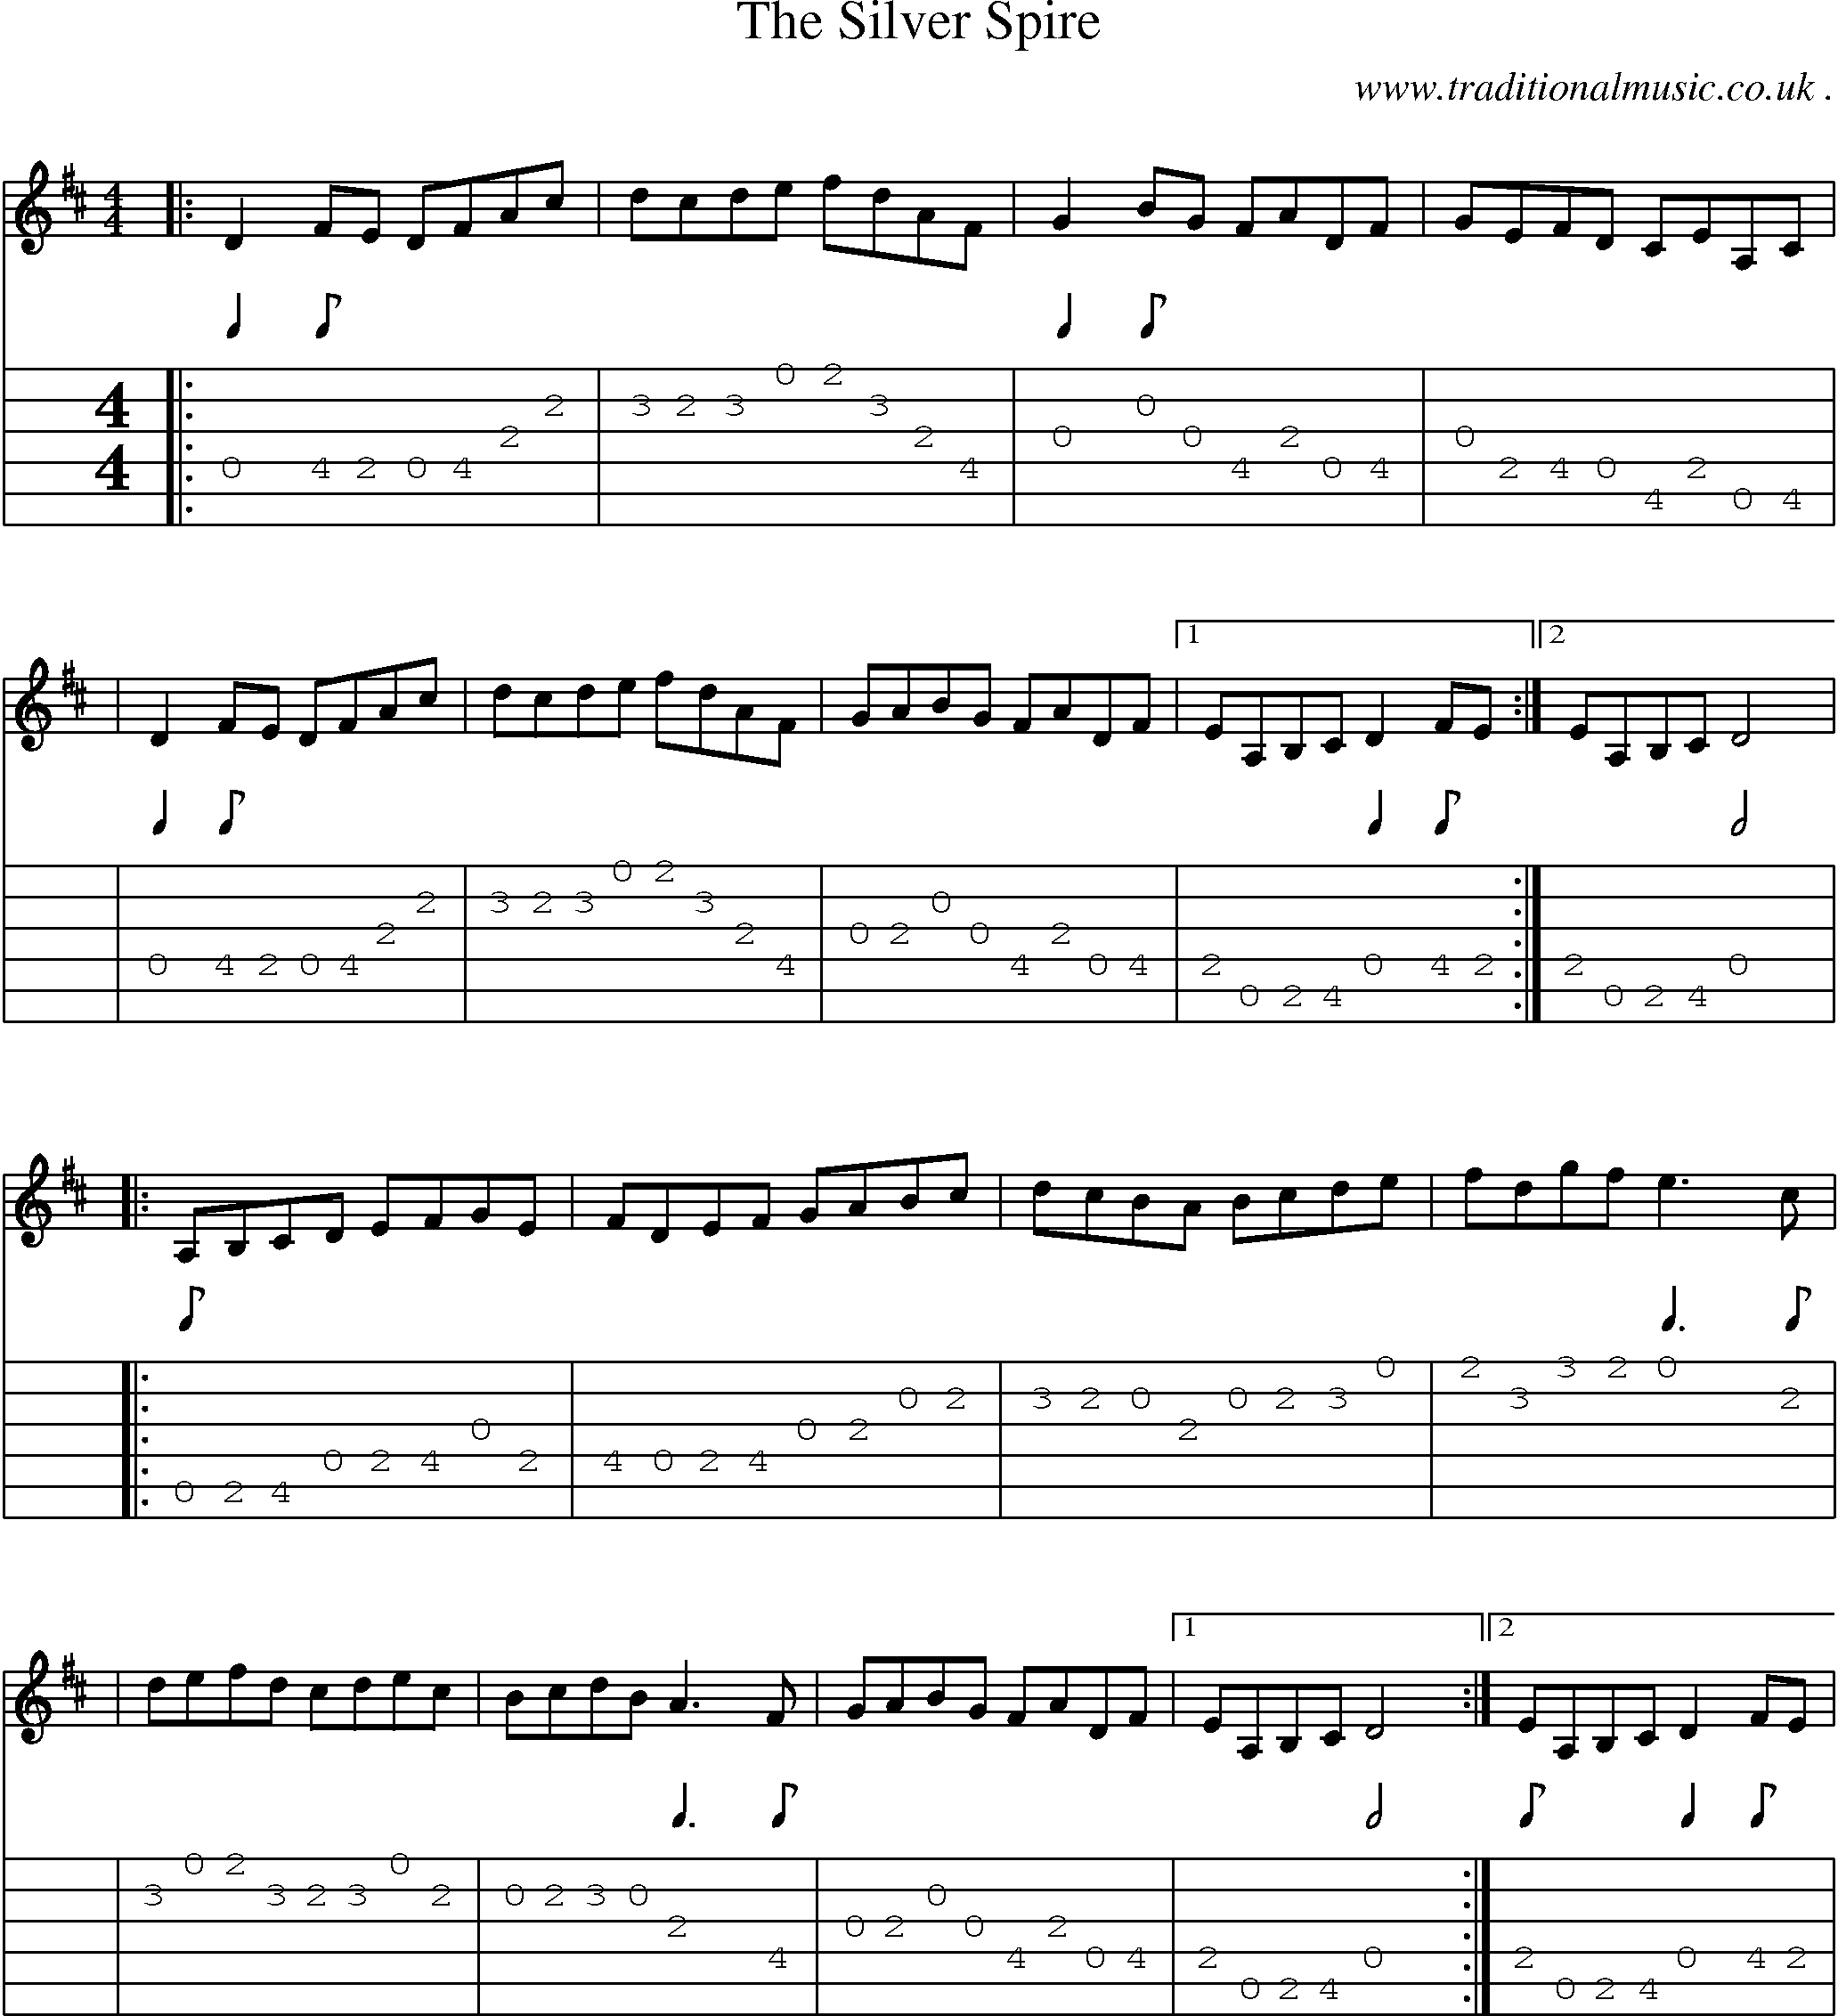 Sheet-Music and Guitar Tabs for The Silver Spire